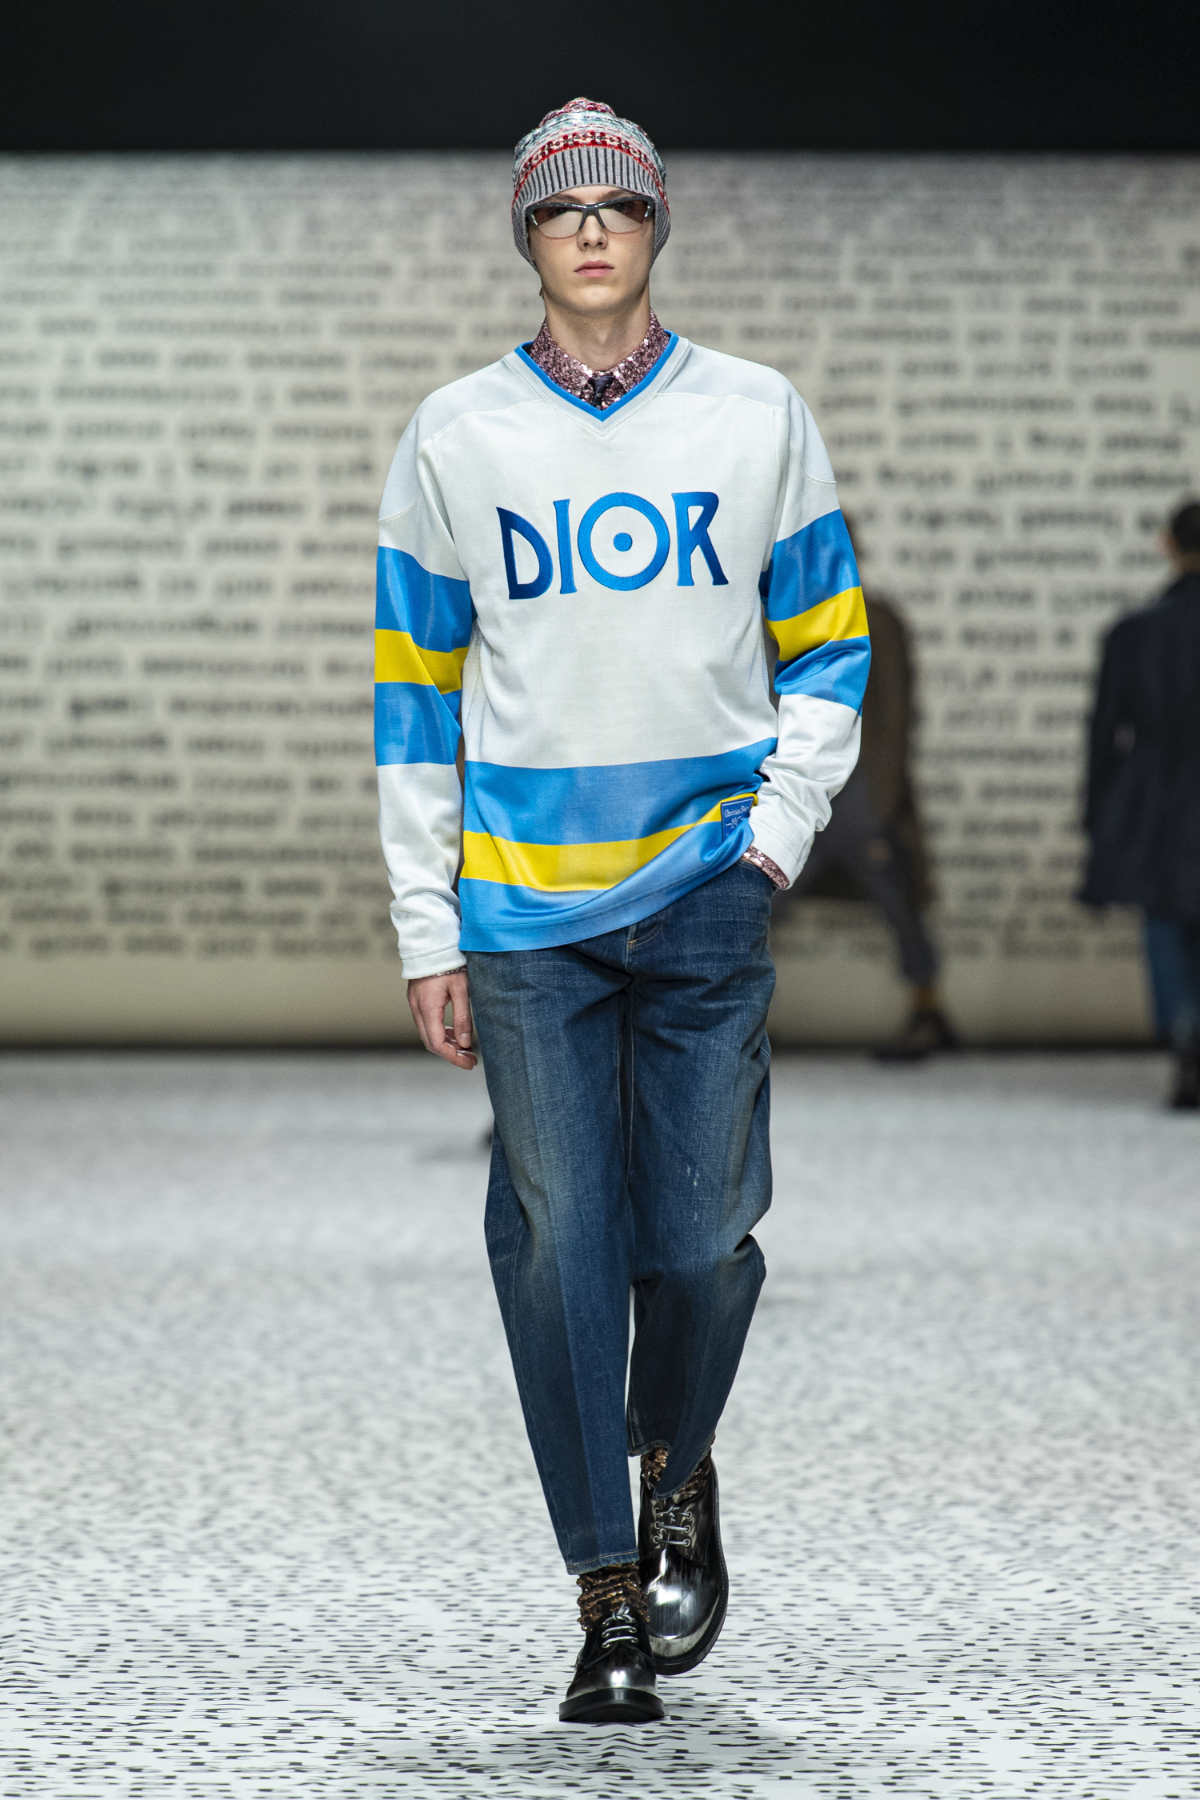 Dior Presents Its New Fall 2022 Men's Collection